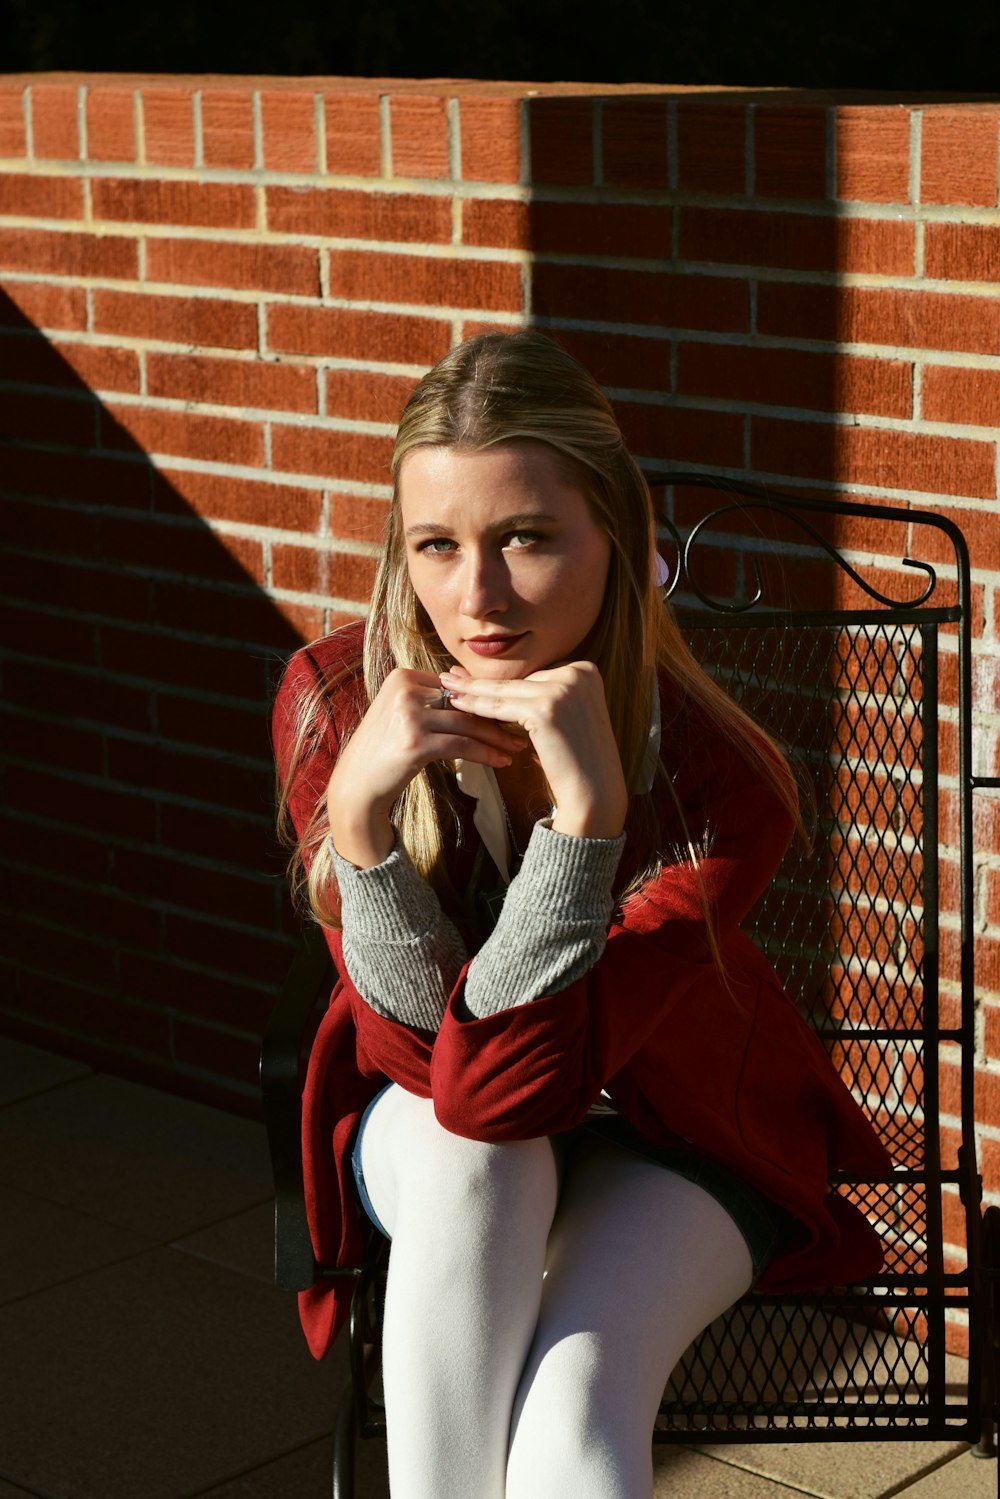 a woman sitting on a bench in front of a brick wall